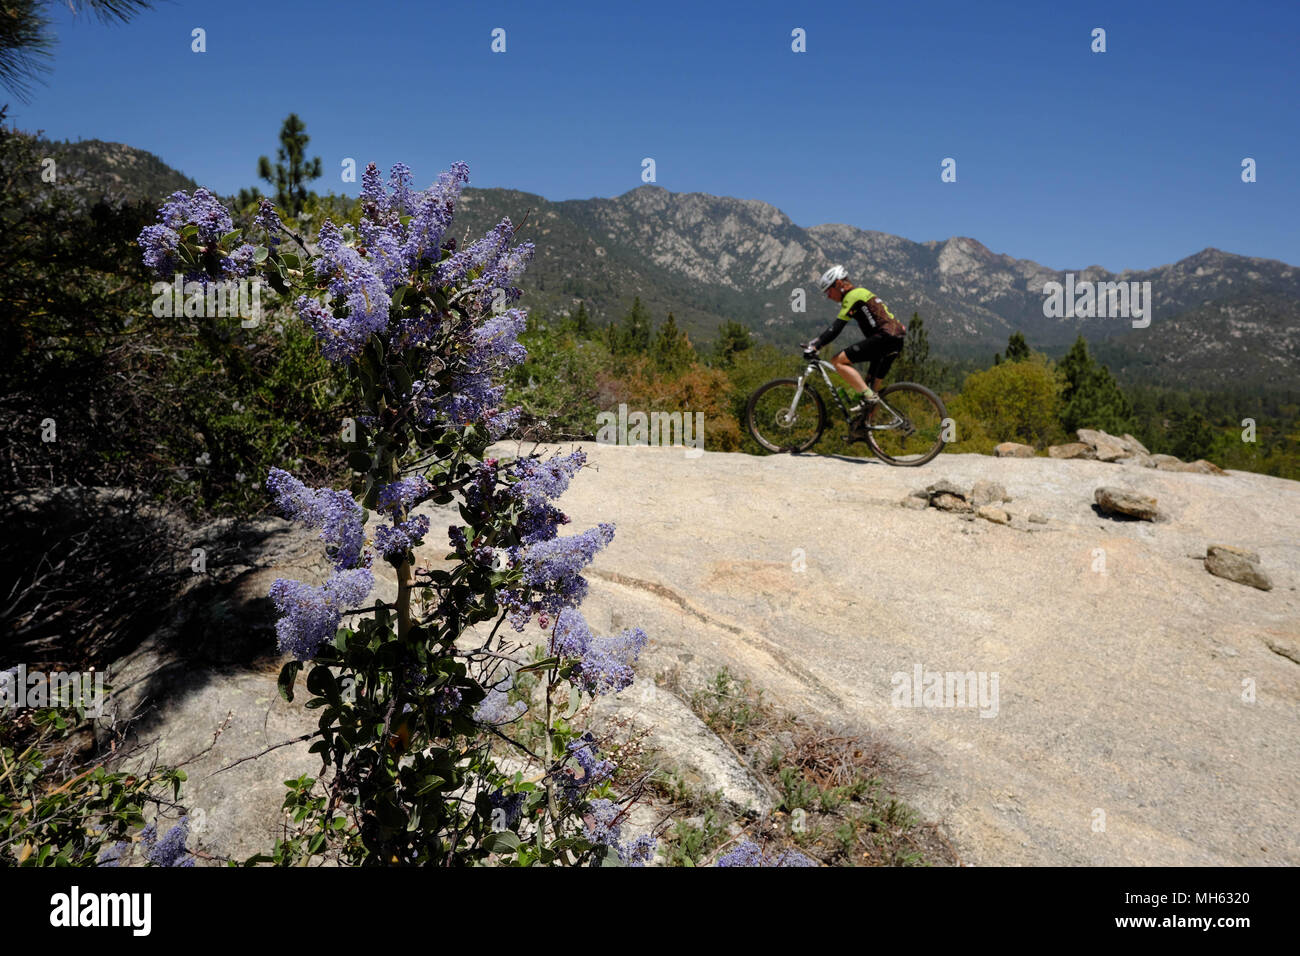 Idyllwild, California, USA. 29th Apr, 2018. Mountain biker rides steep trails past wildflowers, granite rock slabs and pine tress at elevations above 6,500ft high above the desert floor near Idyllwild in the San Jacinto Mountains. Rising abruptly from the desert floor, the Santa Rosa and San Jacinto Mountains National Monument reaches an elevation of 10,834 feet, the northernmost of the Peninsular Ranges system. Many flora and fauna species within the national monument are state and federal listed threatened or endangered species, including the Peninsular Bighorn Sheep (Ovis canadensis cremno Stock Photo